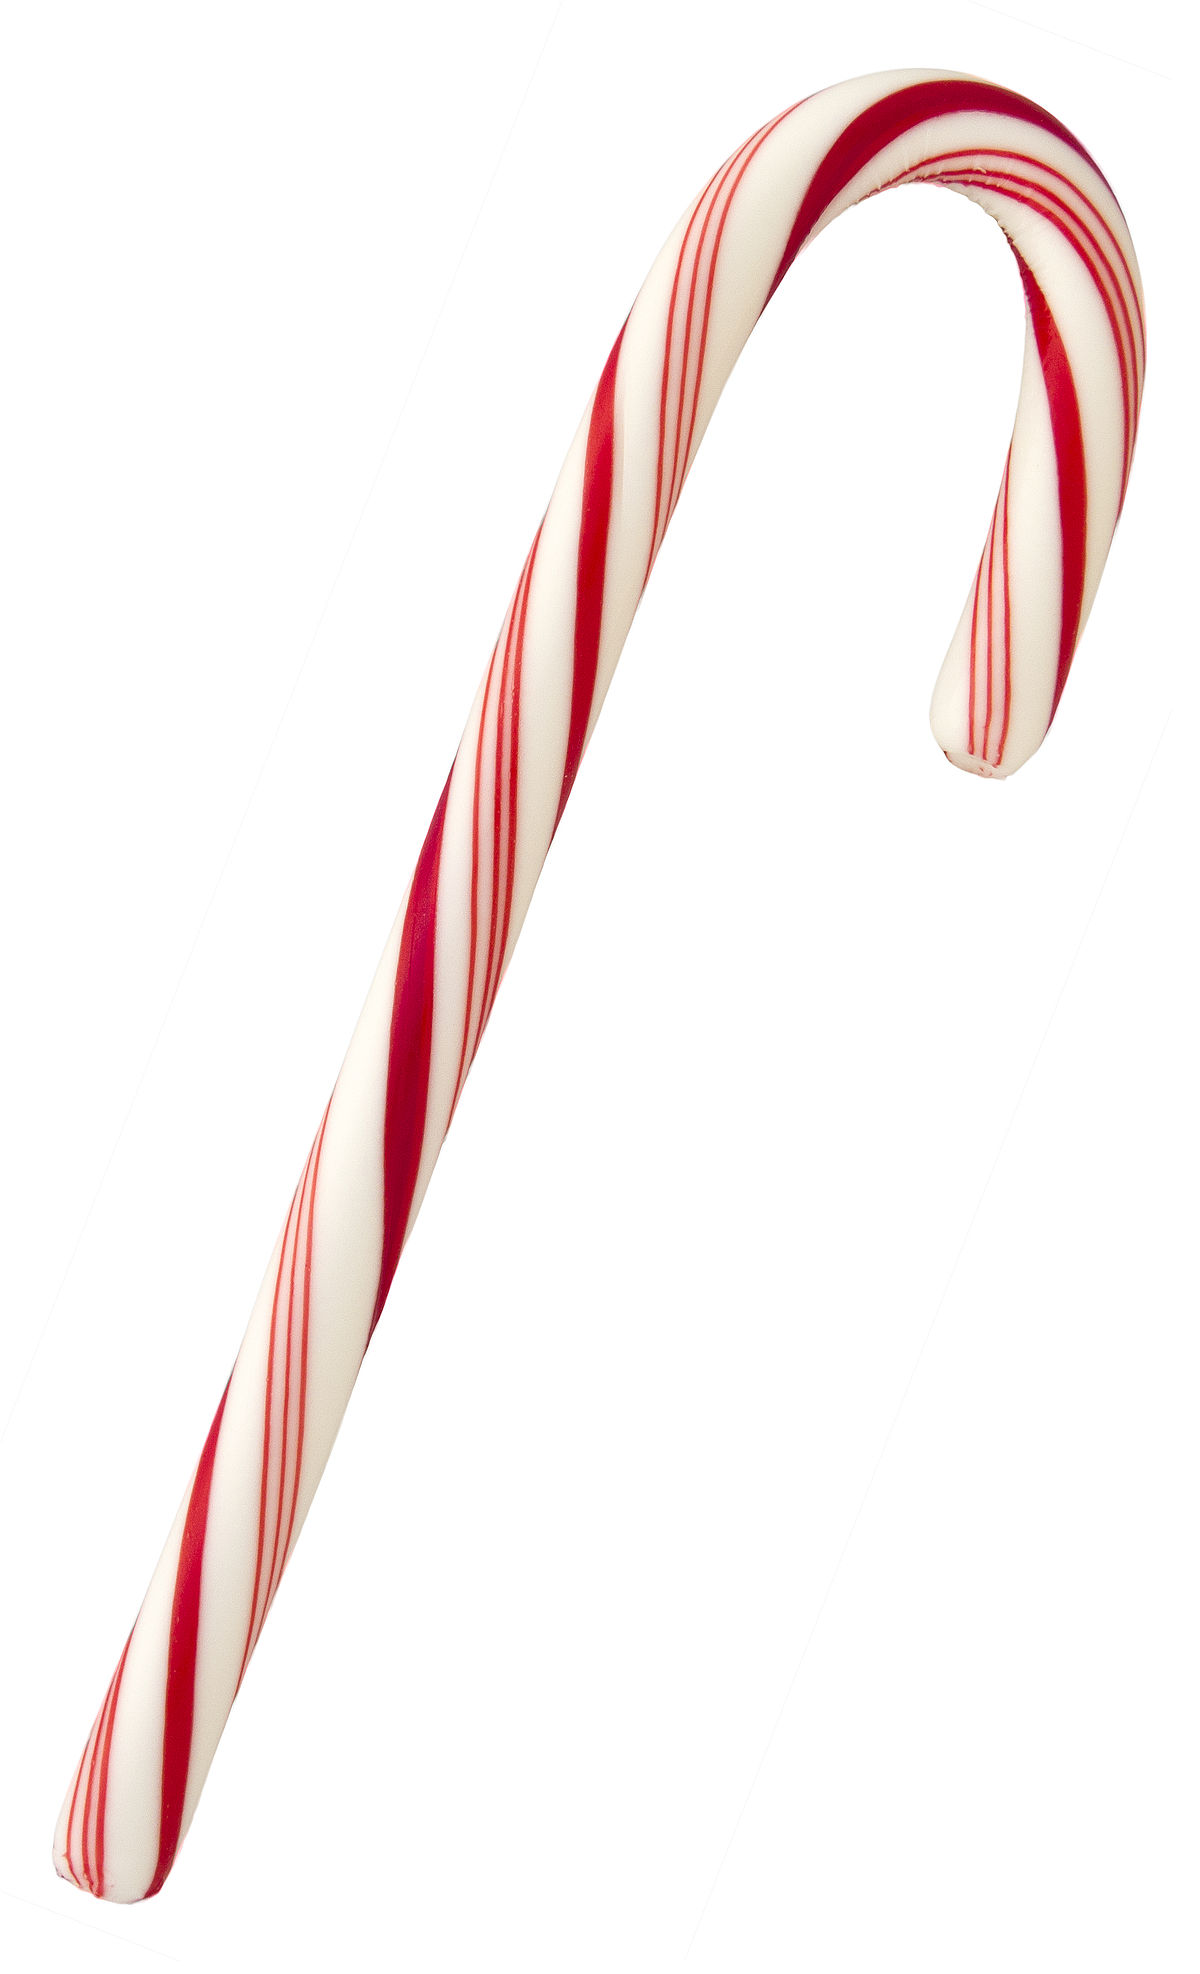 Pictures Of Candy Canes 3